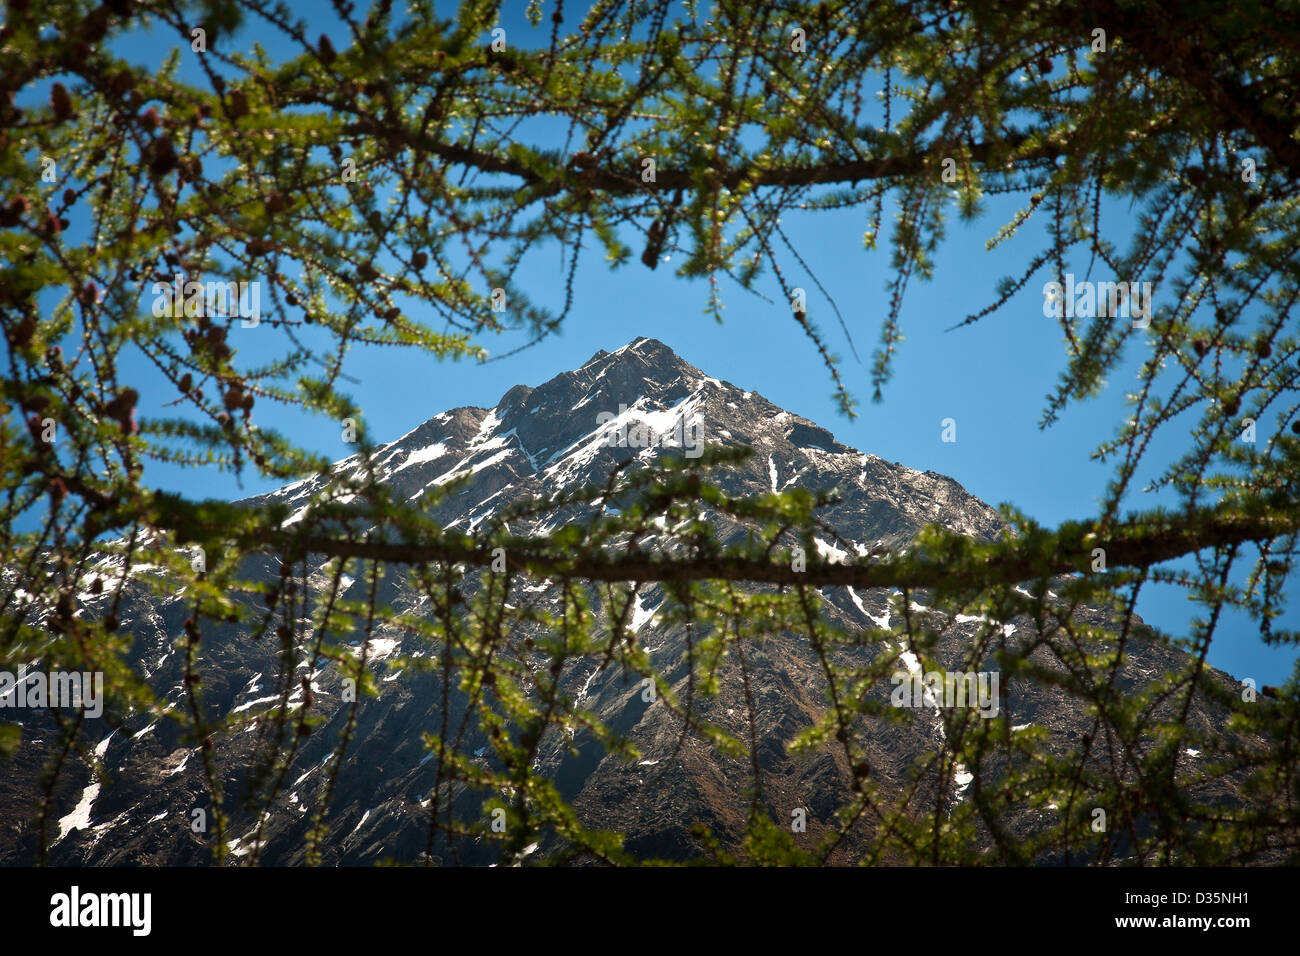 Green pine branches with background of a snow covered mountain peak, Gran Paradiso National Park, Graian Alps, Italy Stock Photo